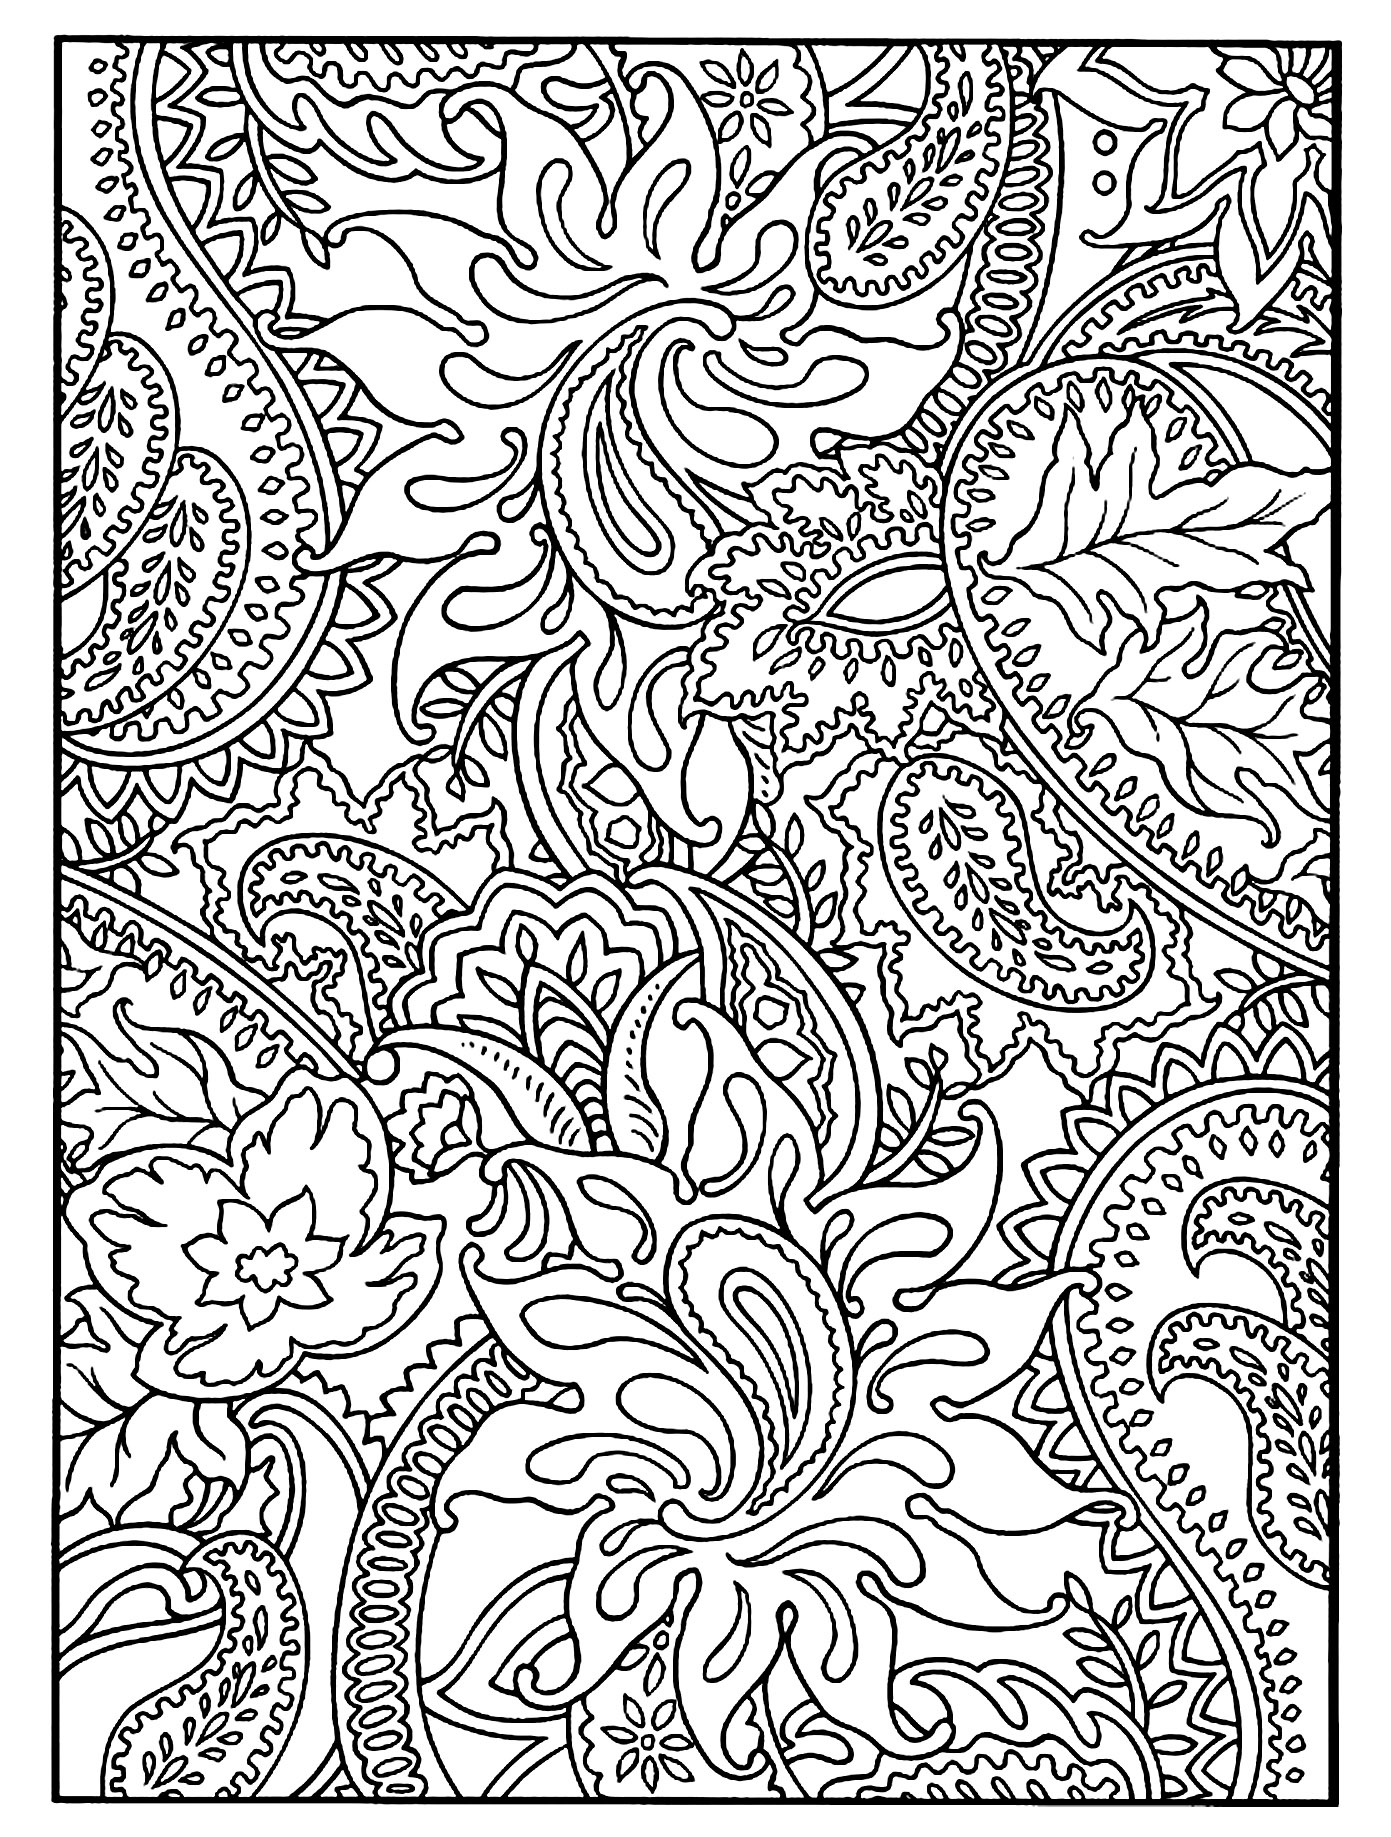 Flowers and harmonious Paisley patterns to color